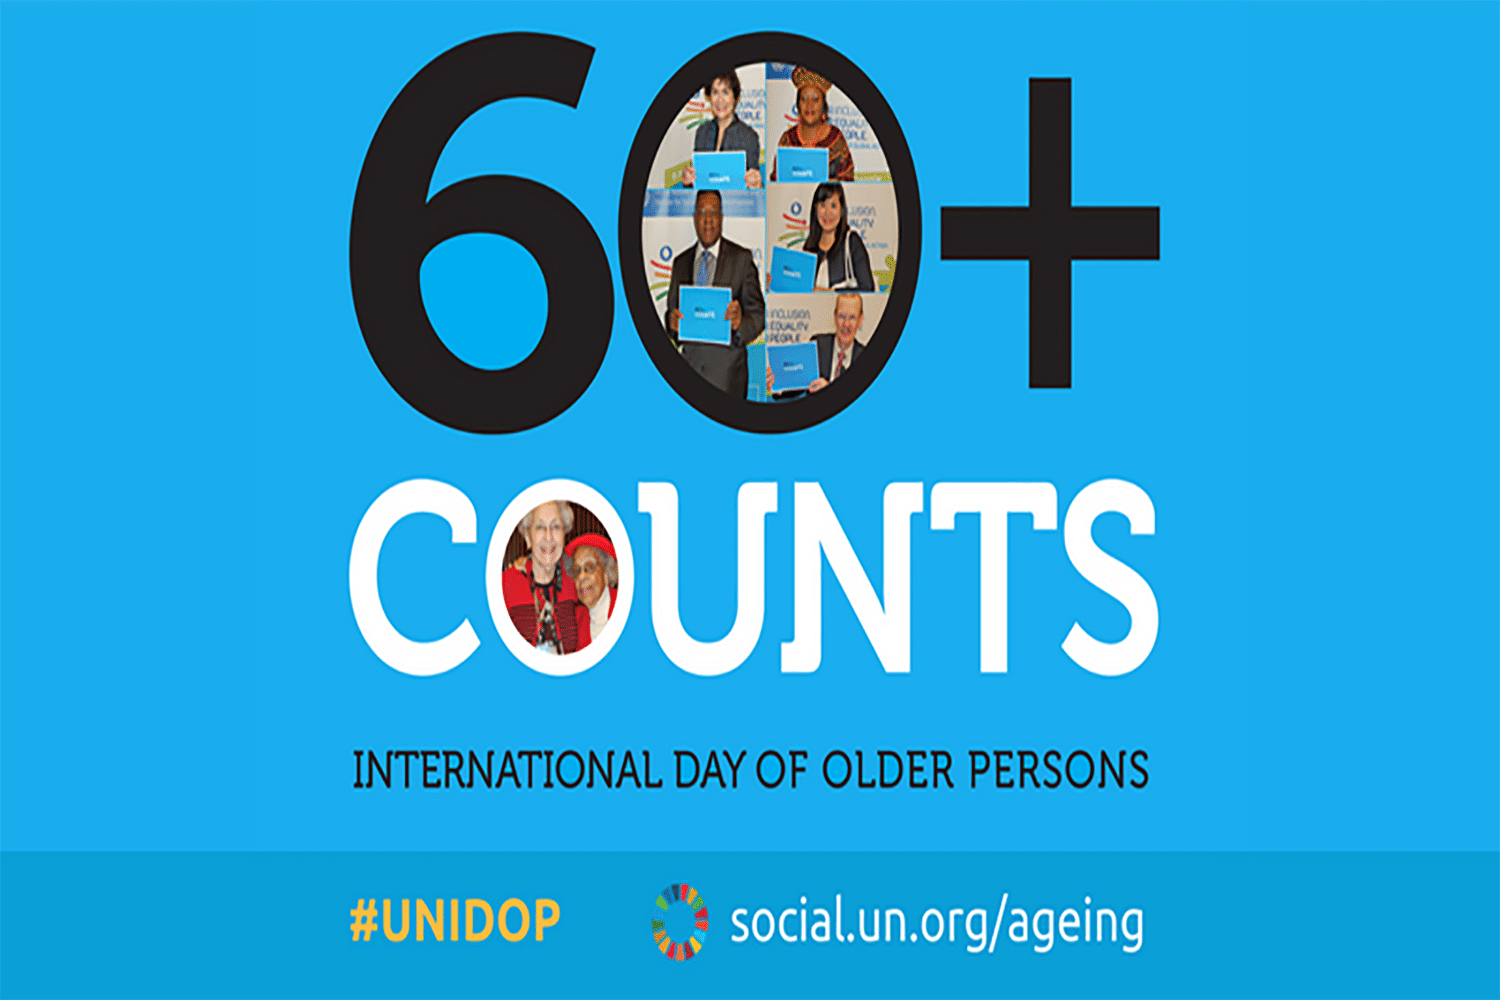 60+ counts: International Day of Older Persons